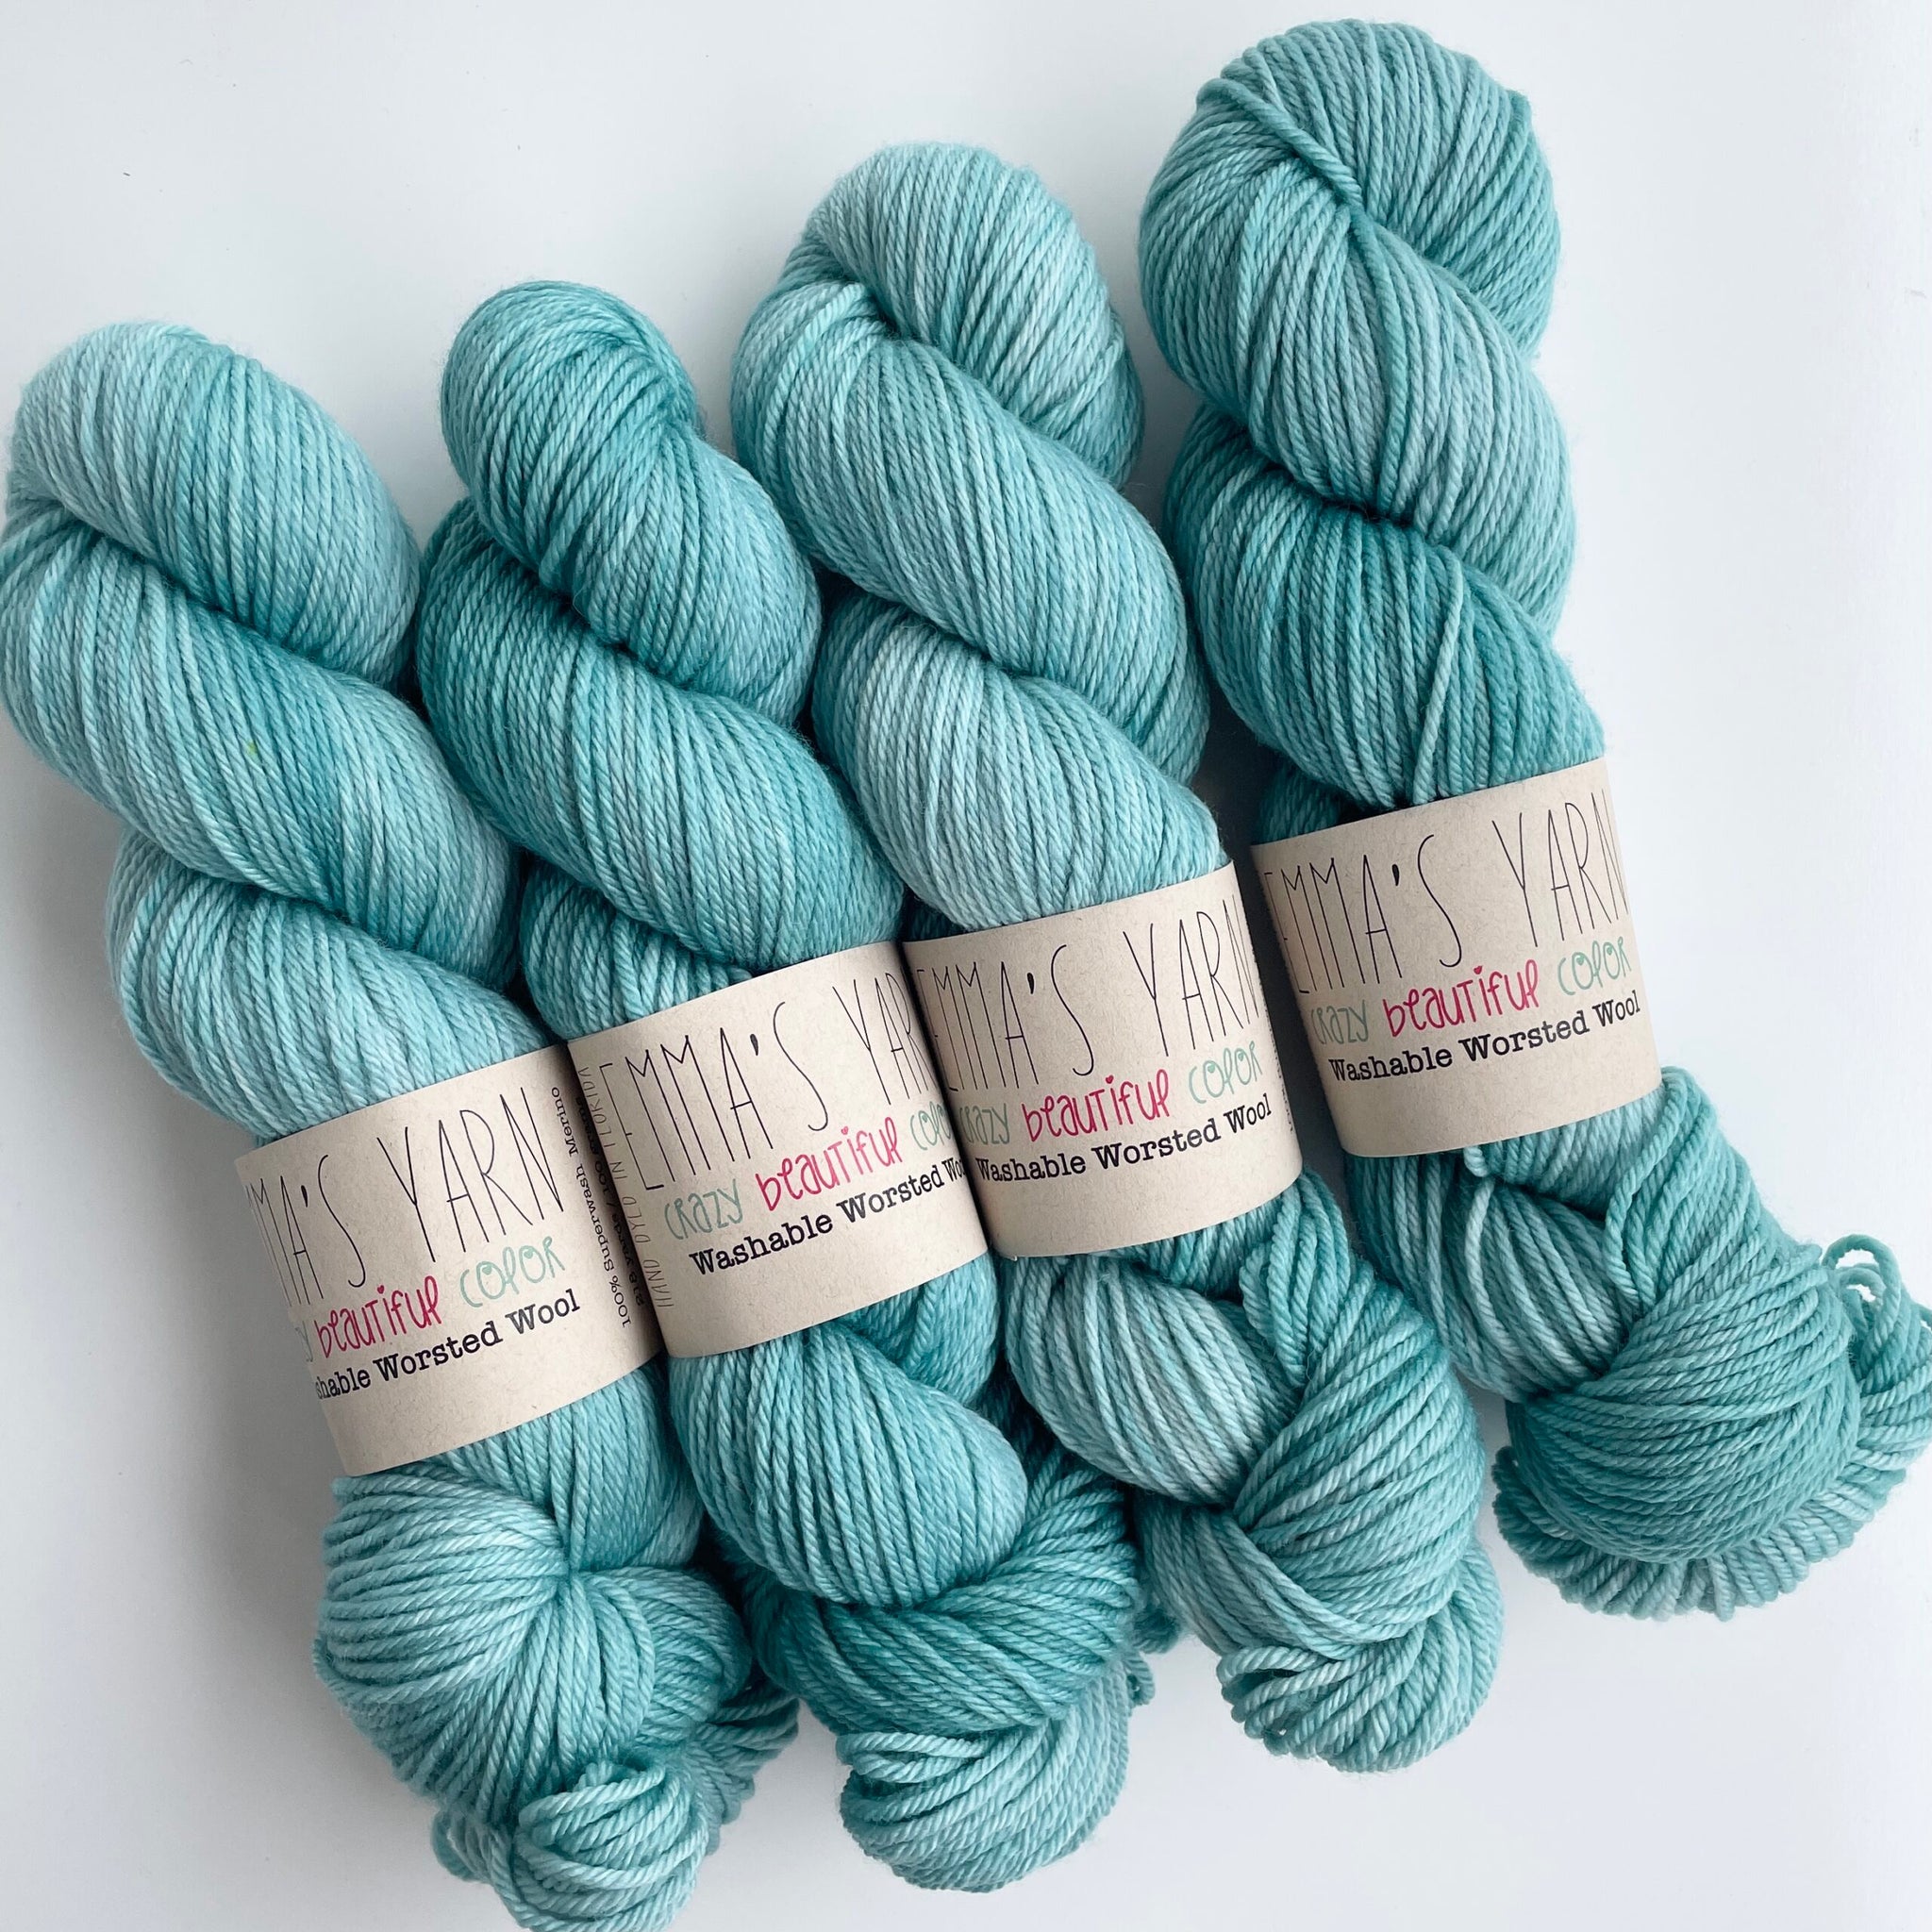 Sea Me Now - Washable Worsted Wool (6)